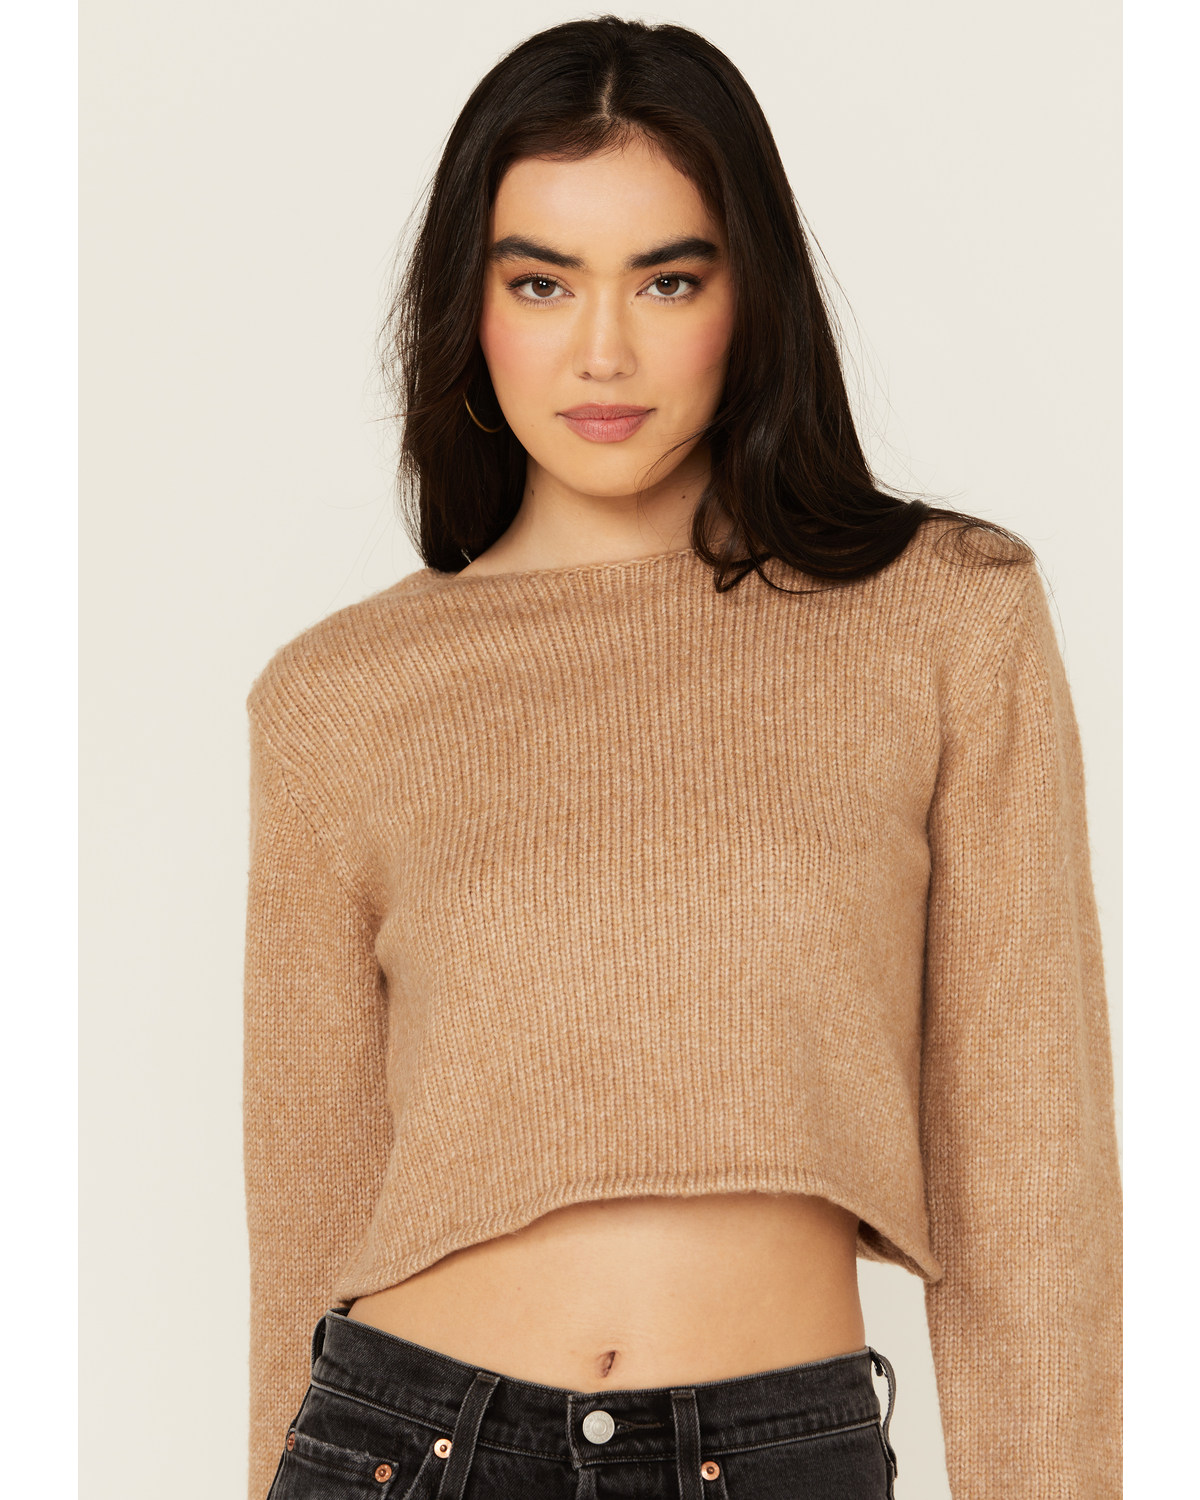 Cleo + Wolf Women's Reversible Cut Out Cropped Sweater